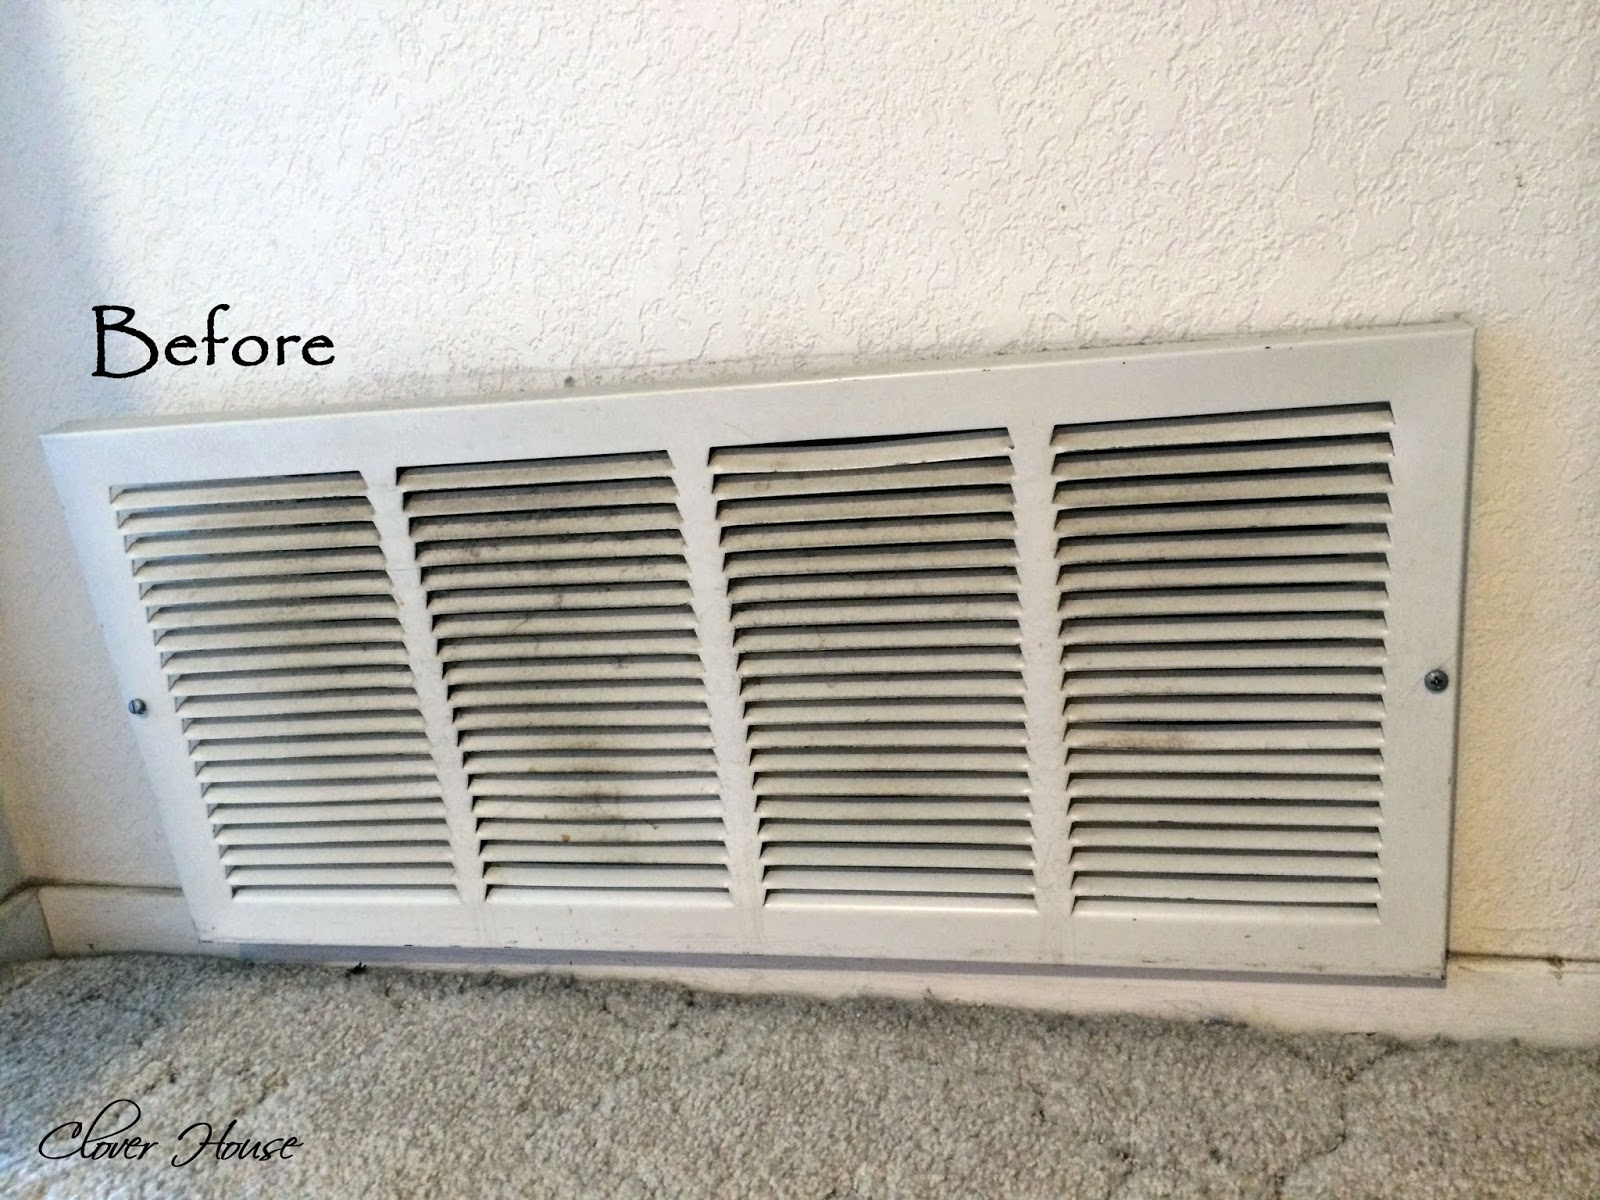 clover-house-how-to-clean-your-return-air-vent